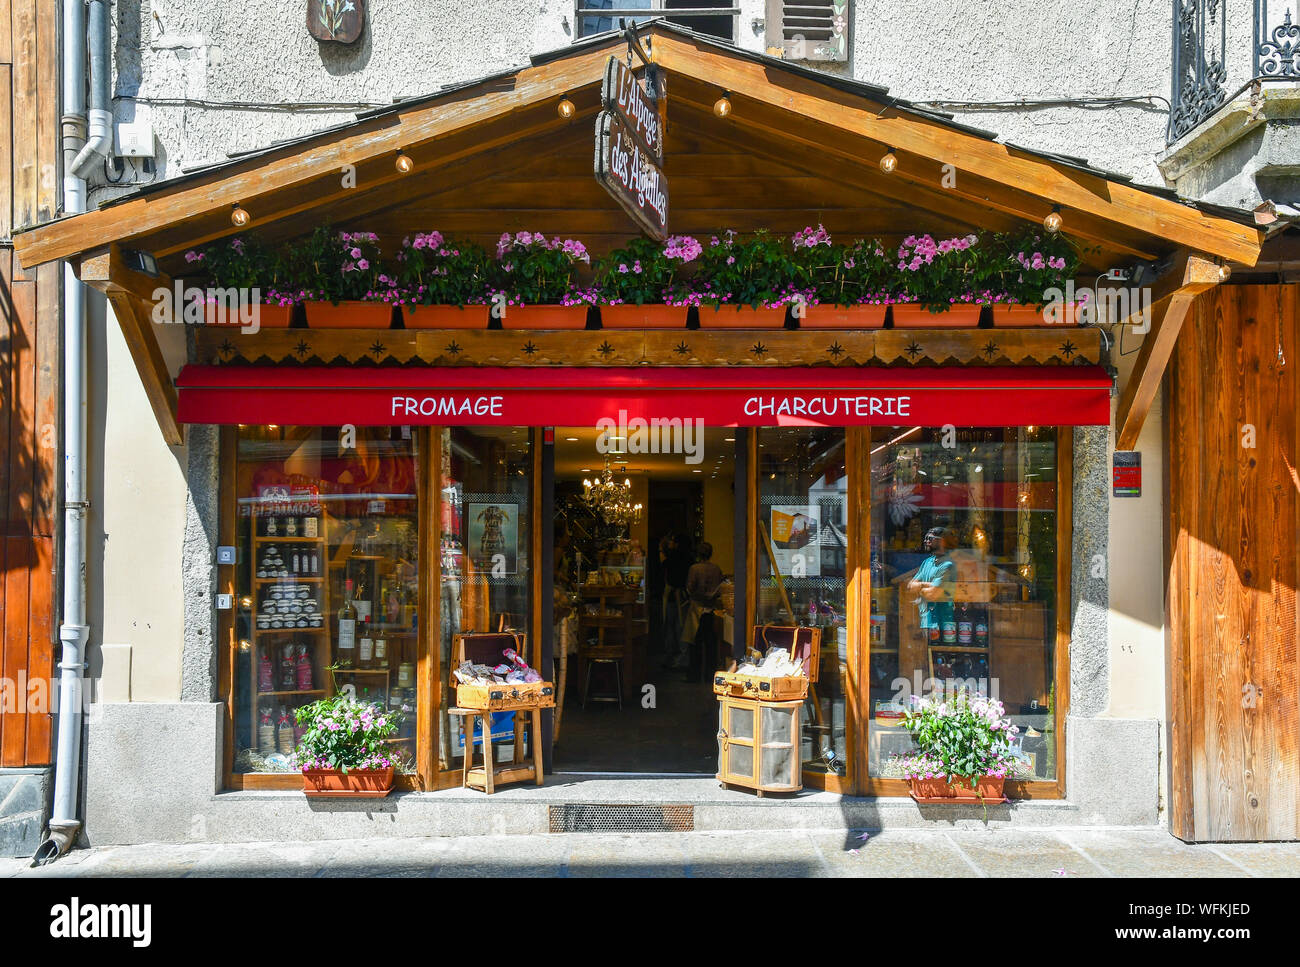 Exterior of a local cold meats and cheese shop in alpine hut style in summer, Chamonix-Mont-Blanc, Haute Savoie, Alps, France Stock Photo